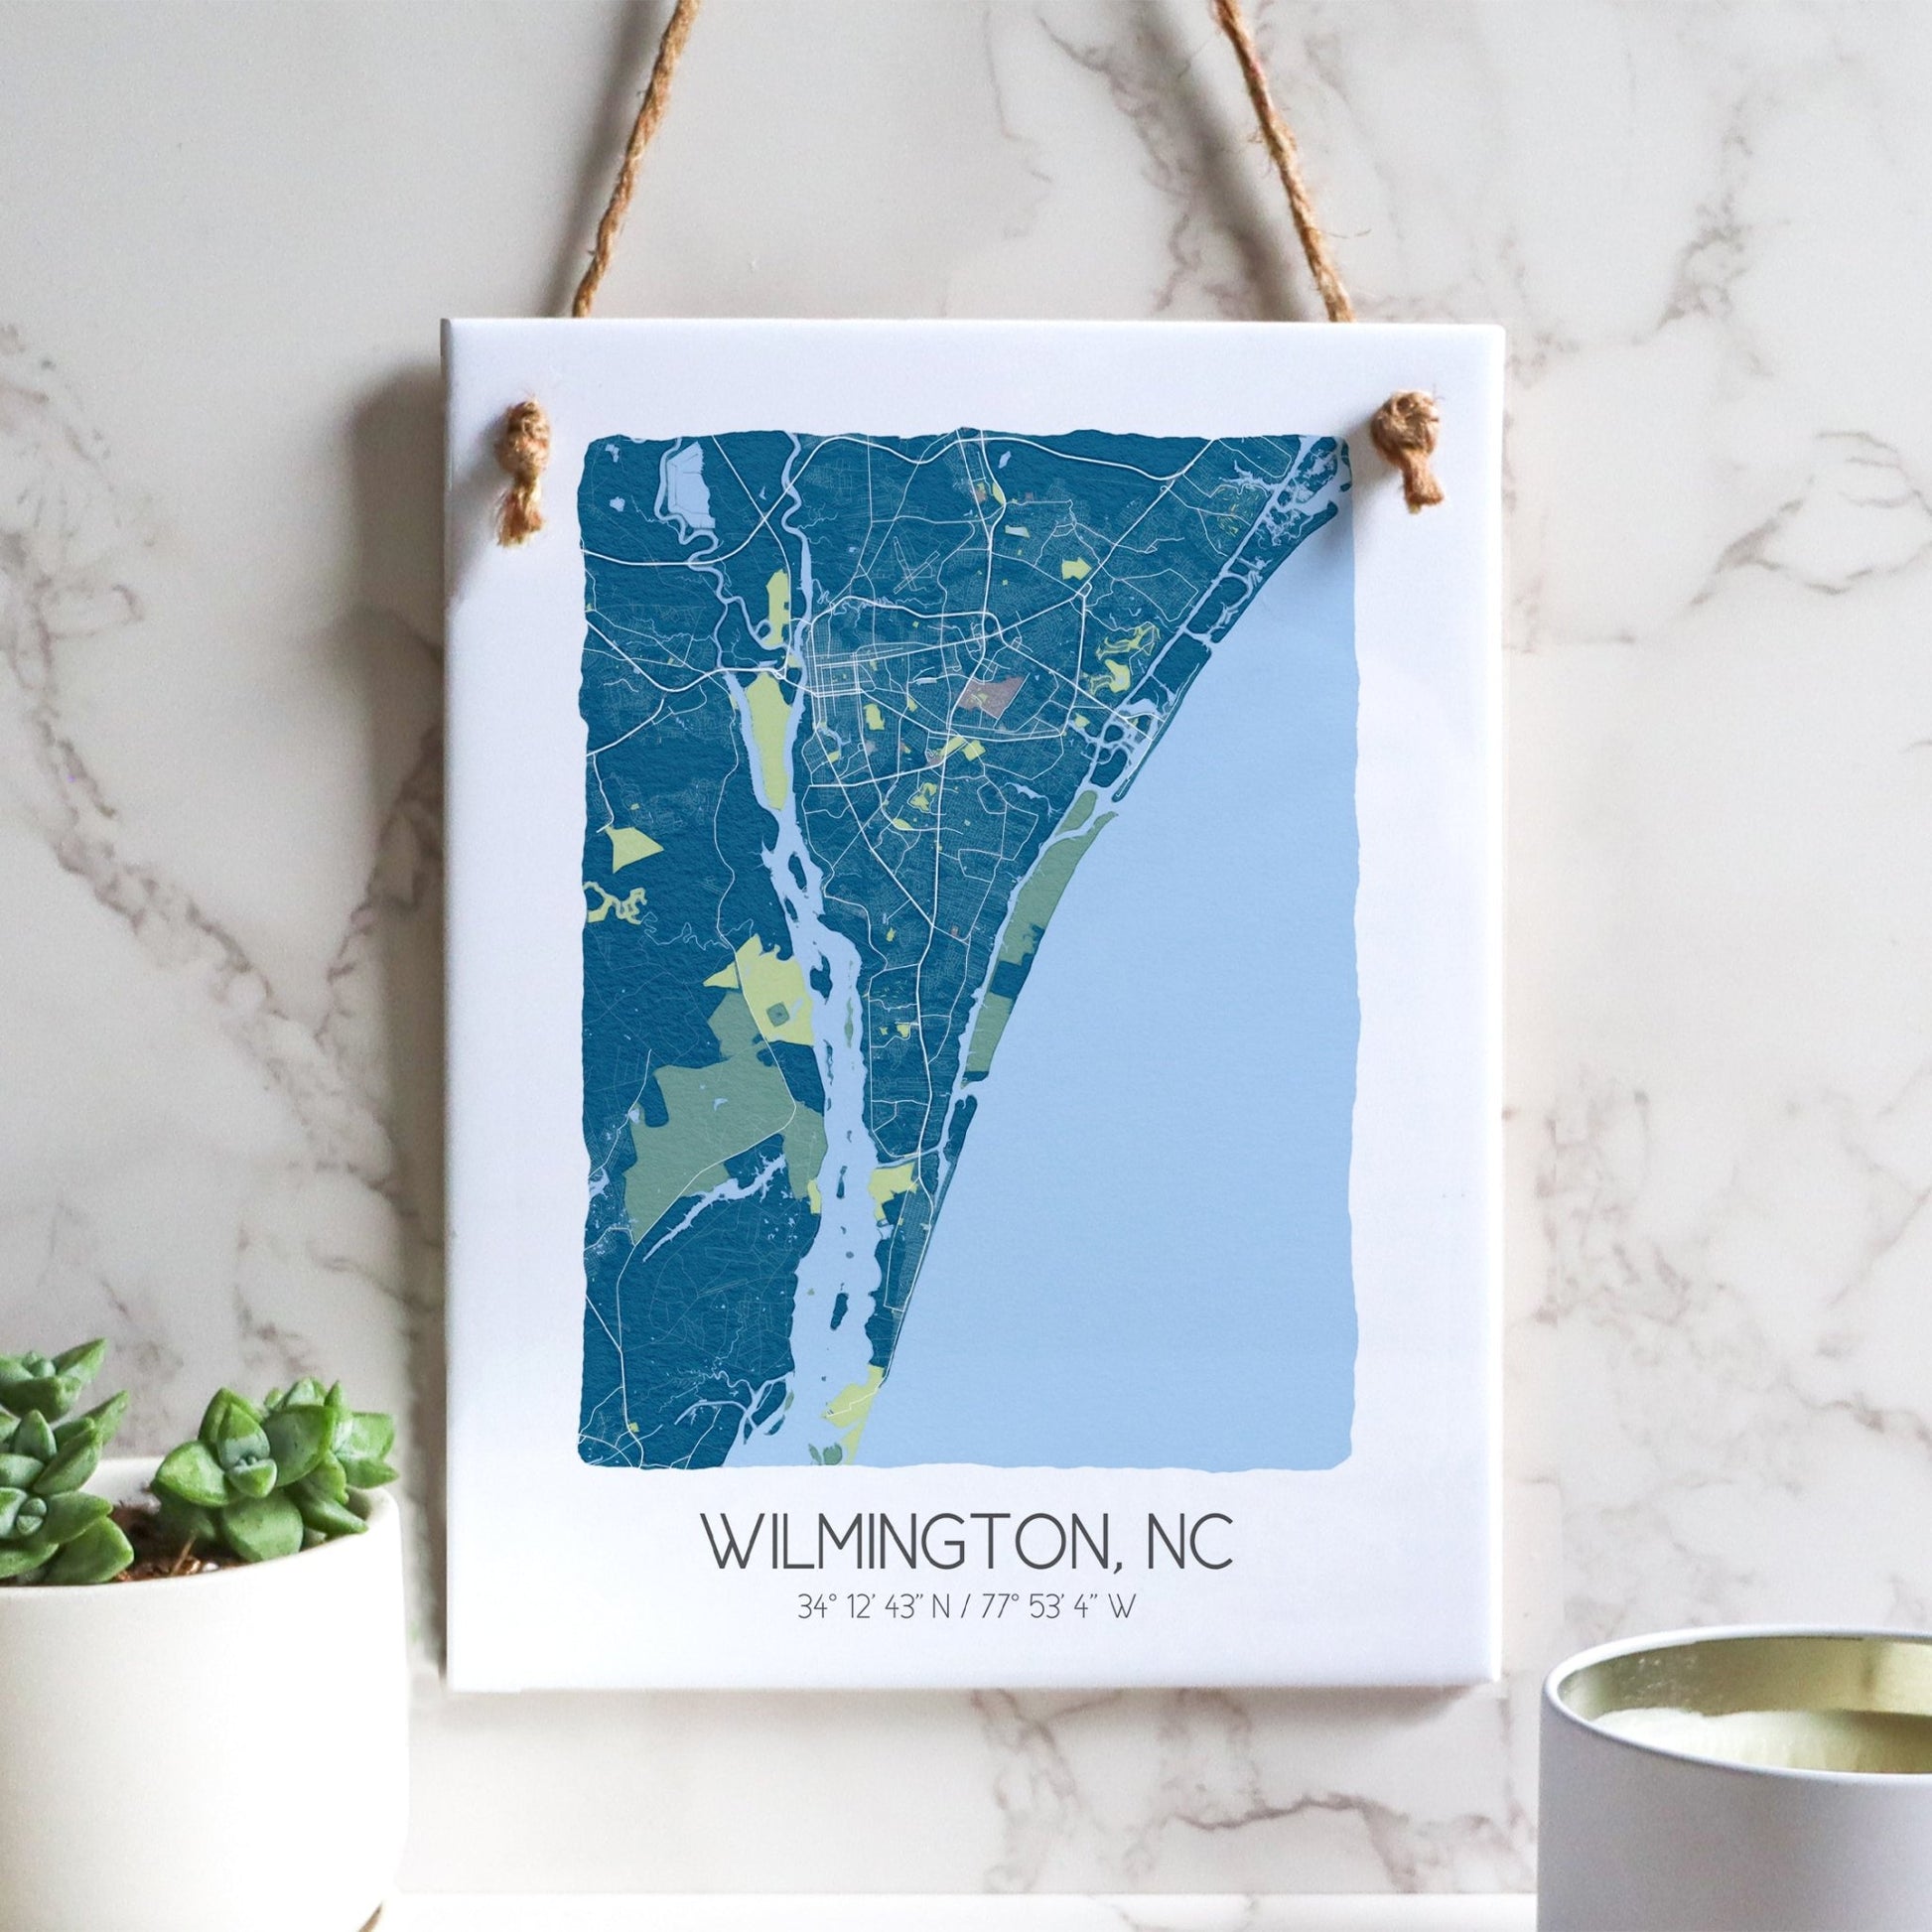 A Wilmington NC city map on a ceramic rectangle tile sign hanging on a wall, in blue